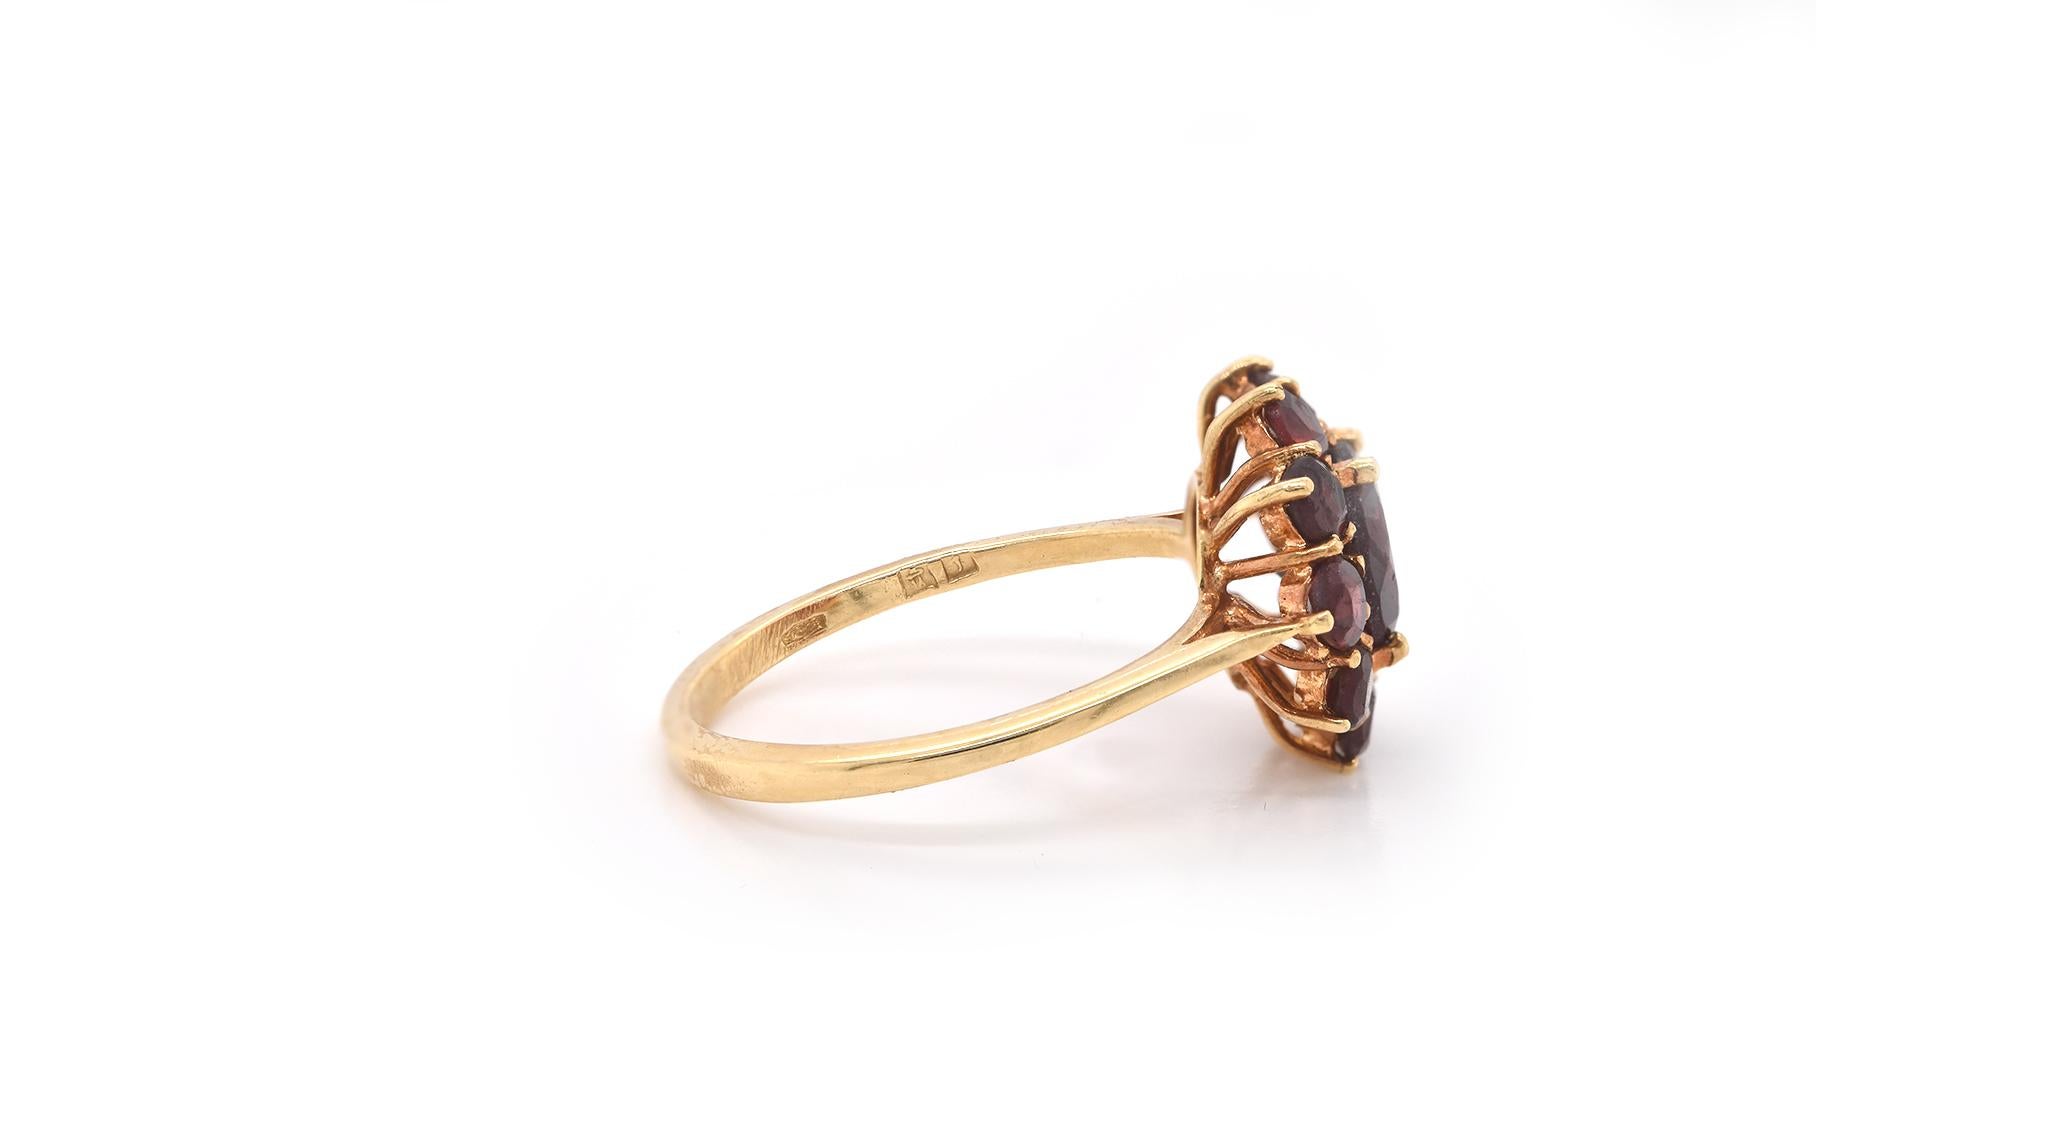 Designer: Custom
Material: 18k yellow gold
Garnets: 11 round cut garnets
Dimensions: ring top measures 13.35mm in diameter
Ring Size: 6.5 (please allow two extra shipping days for sizing requests) 
Weight: 3.5 grams
